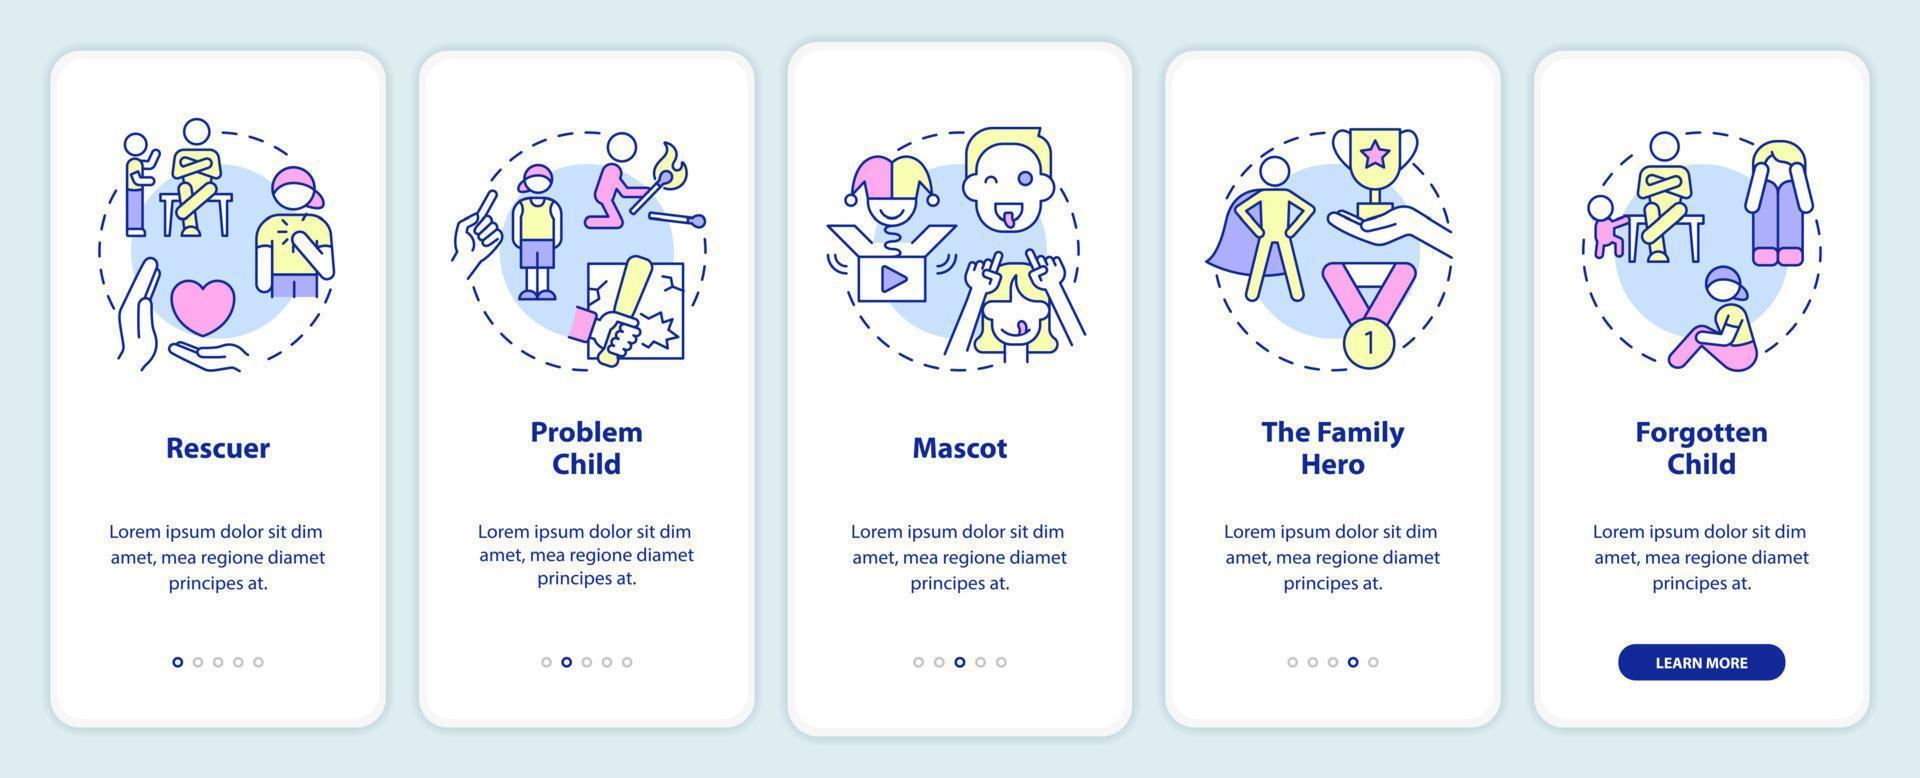 Child roles in dysfunctional families onboarding mobile app screen. Walkthrough 5 steps graphic instructions pages with linear concepts. UI, UX, GUI template. vector